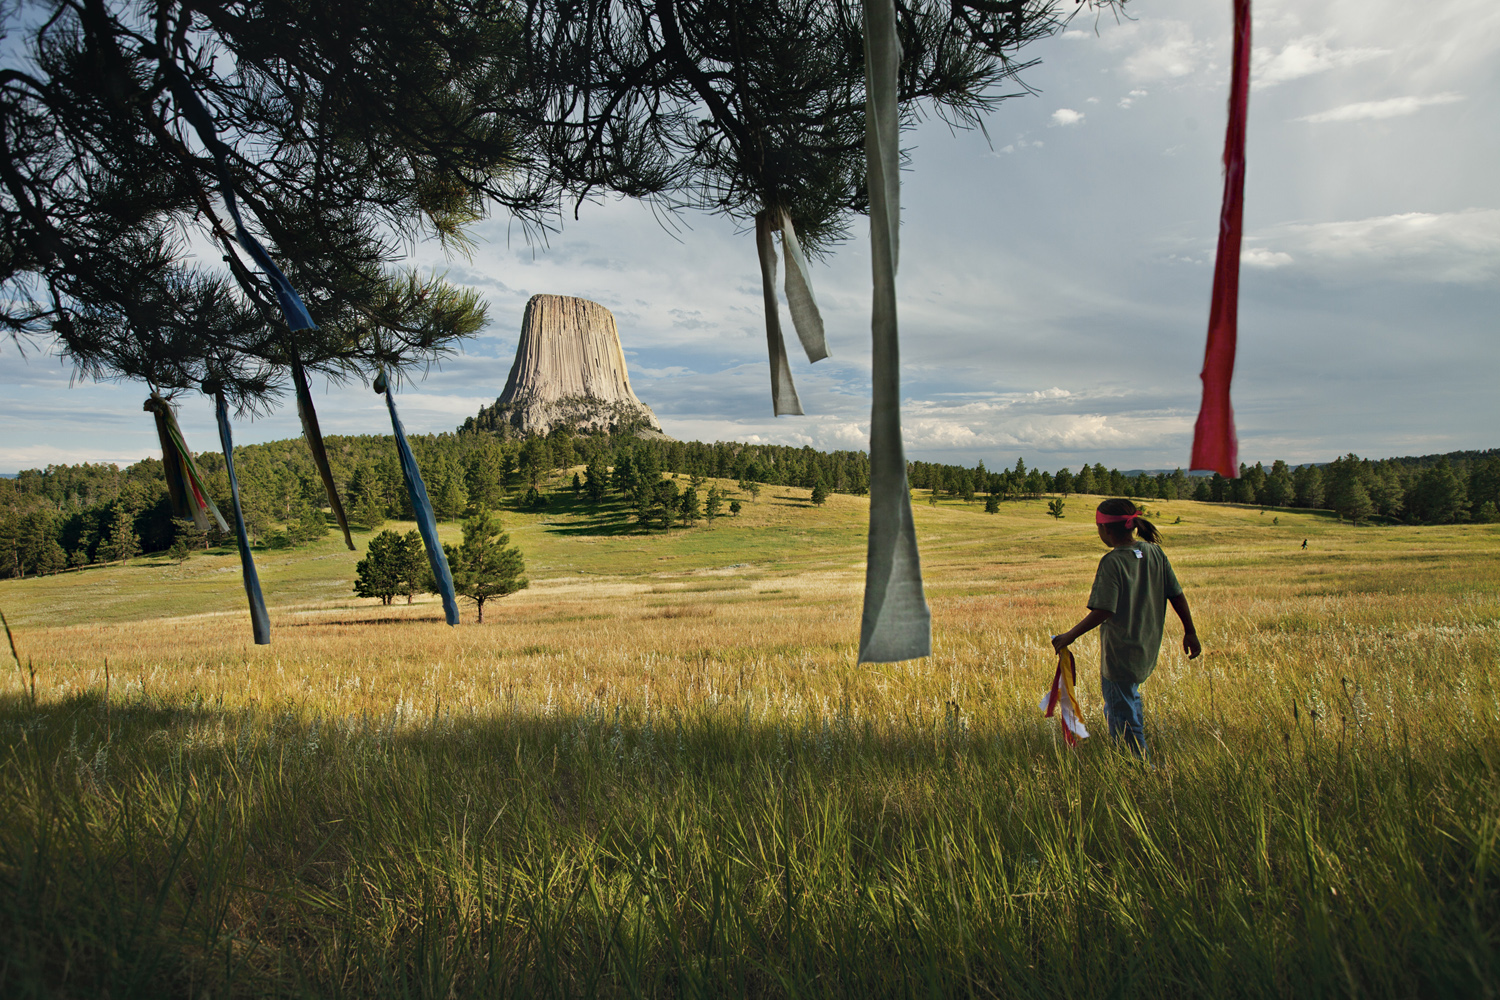 Nine-year-old Wakinyan Two Bulls places prayer flags in a tree near Mato Tipila ( bear lodge ), or Devils Tower, in Wyoming. The story of the Oglala, their spirituality and their fight to remedy old wrongs goes well beyond the Pine Ridge Reservation.